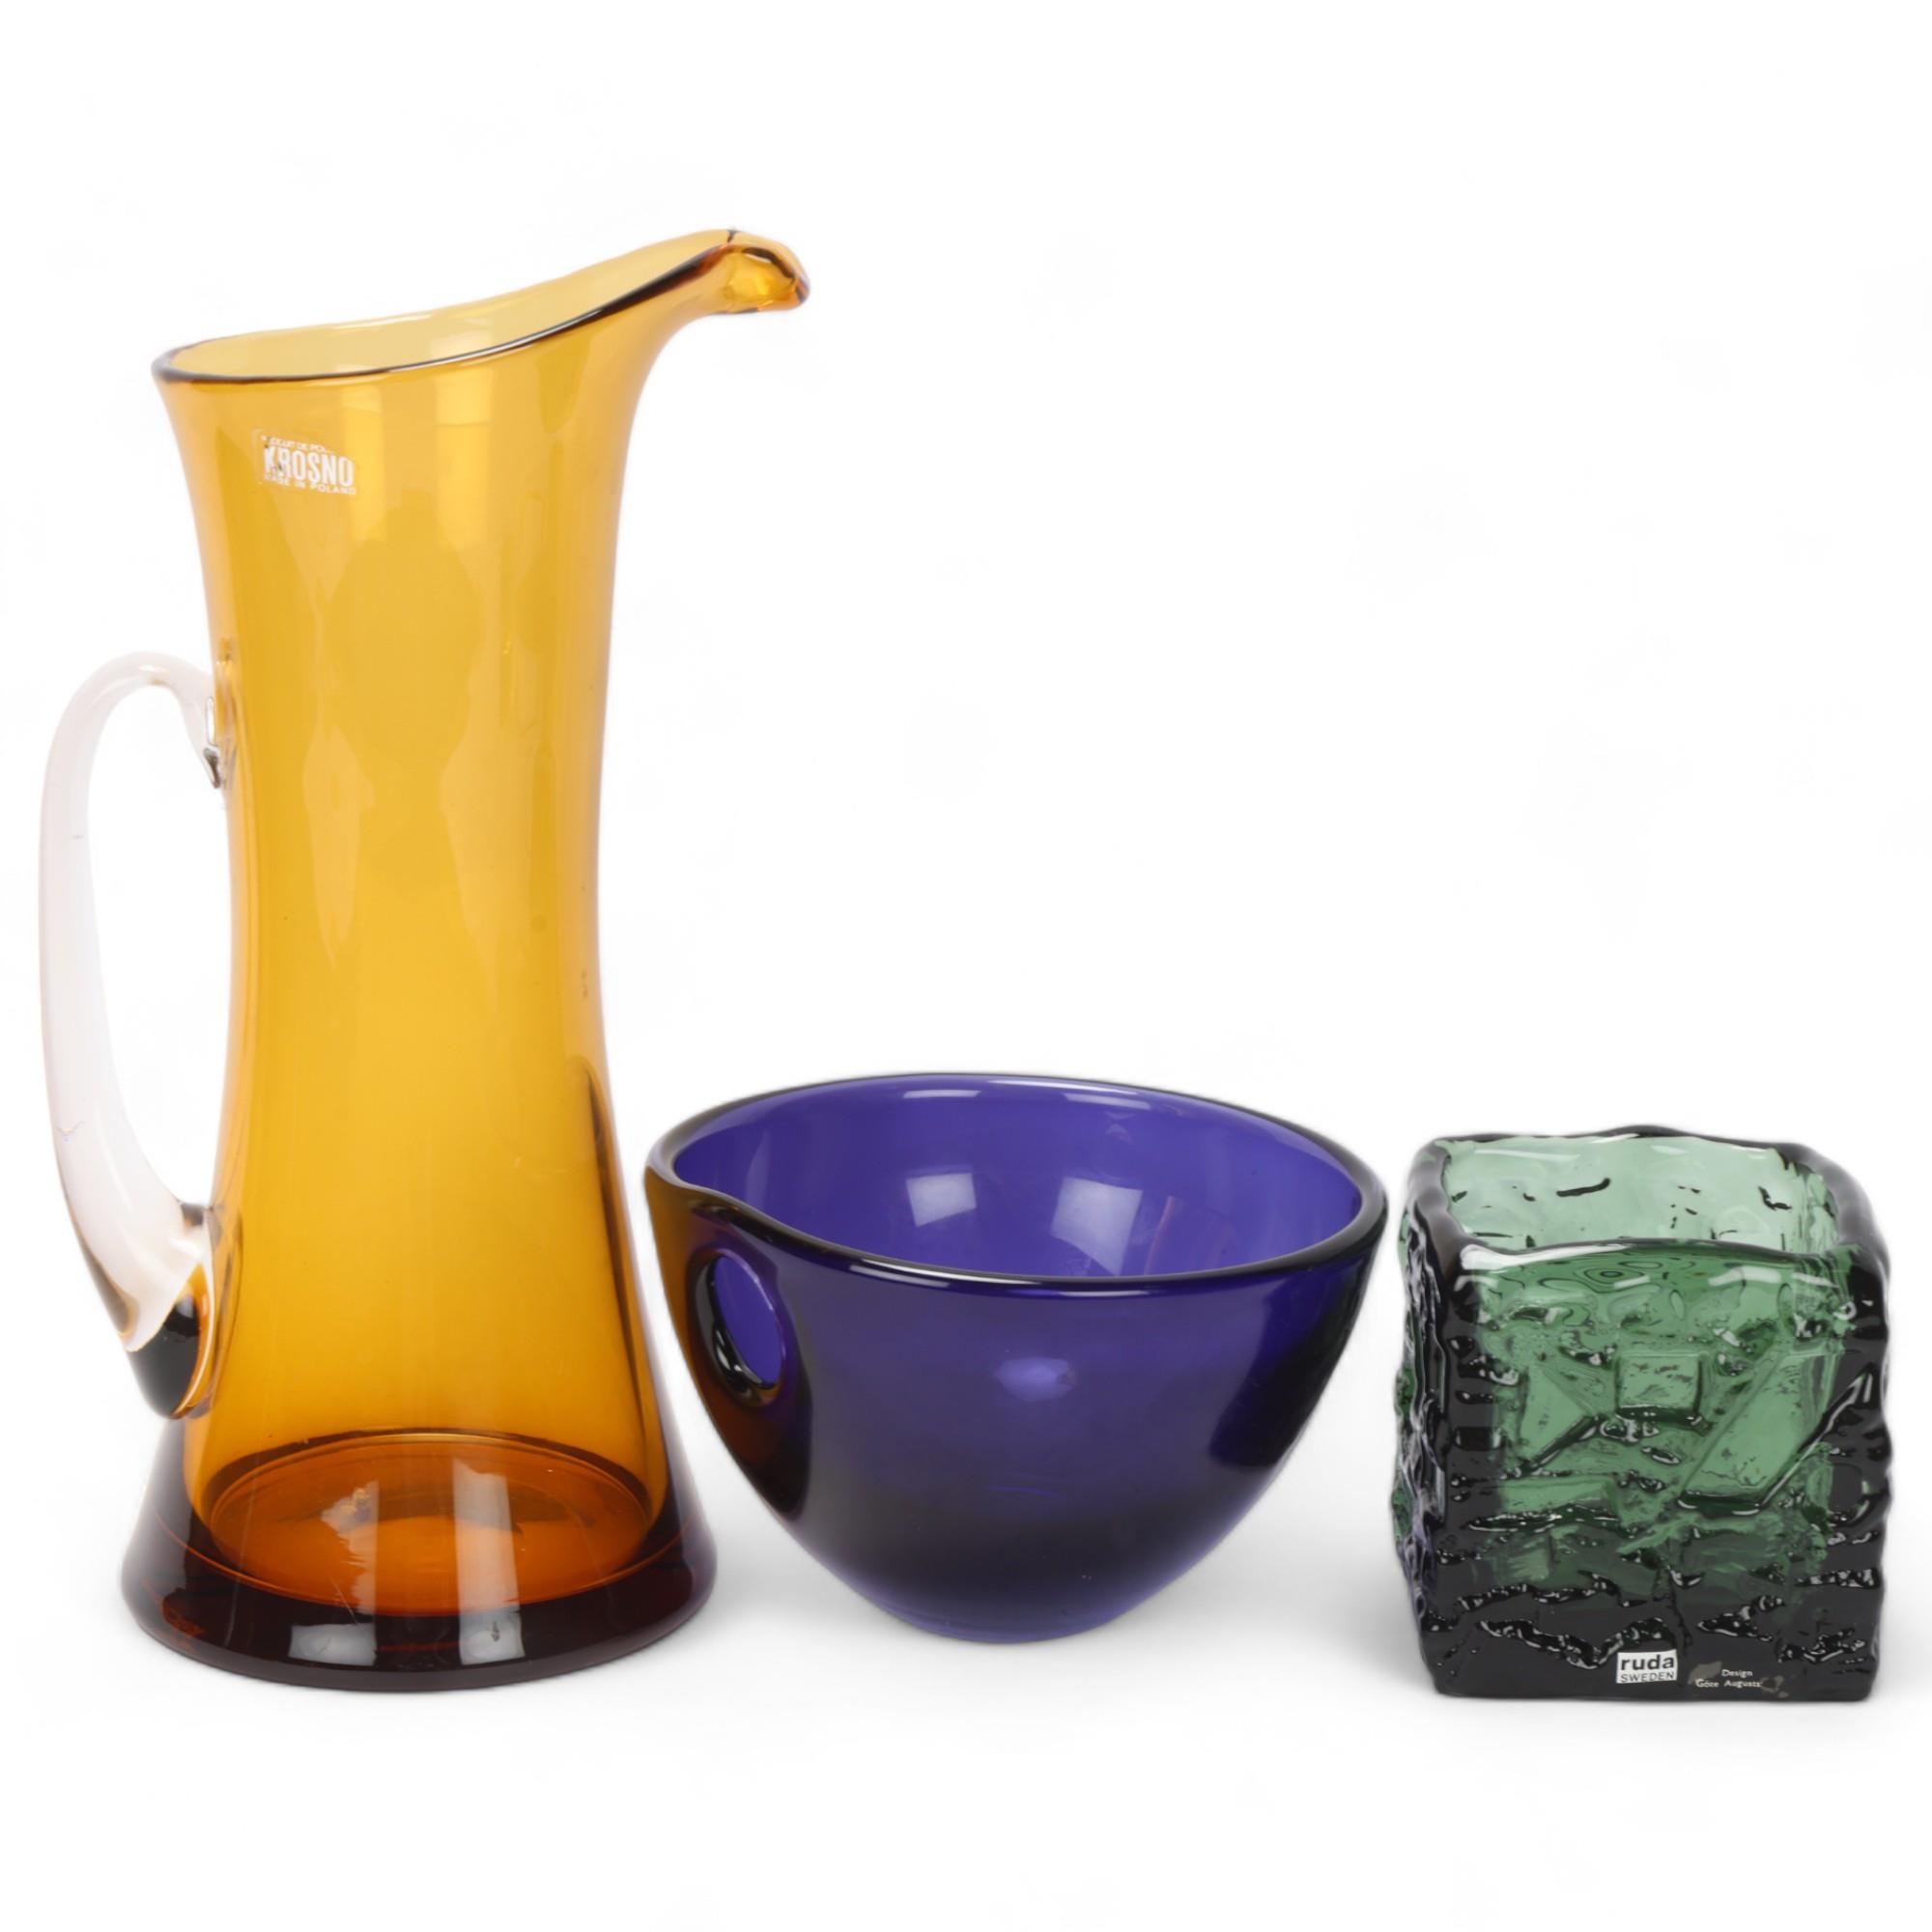 GOTE AUGUSTSSON for Ruda Glass, Sweden, a 1970's square smoked and textured glass vase, with